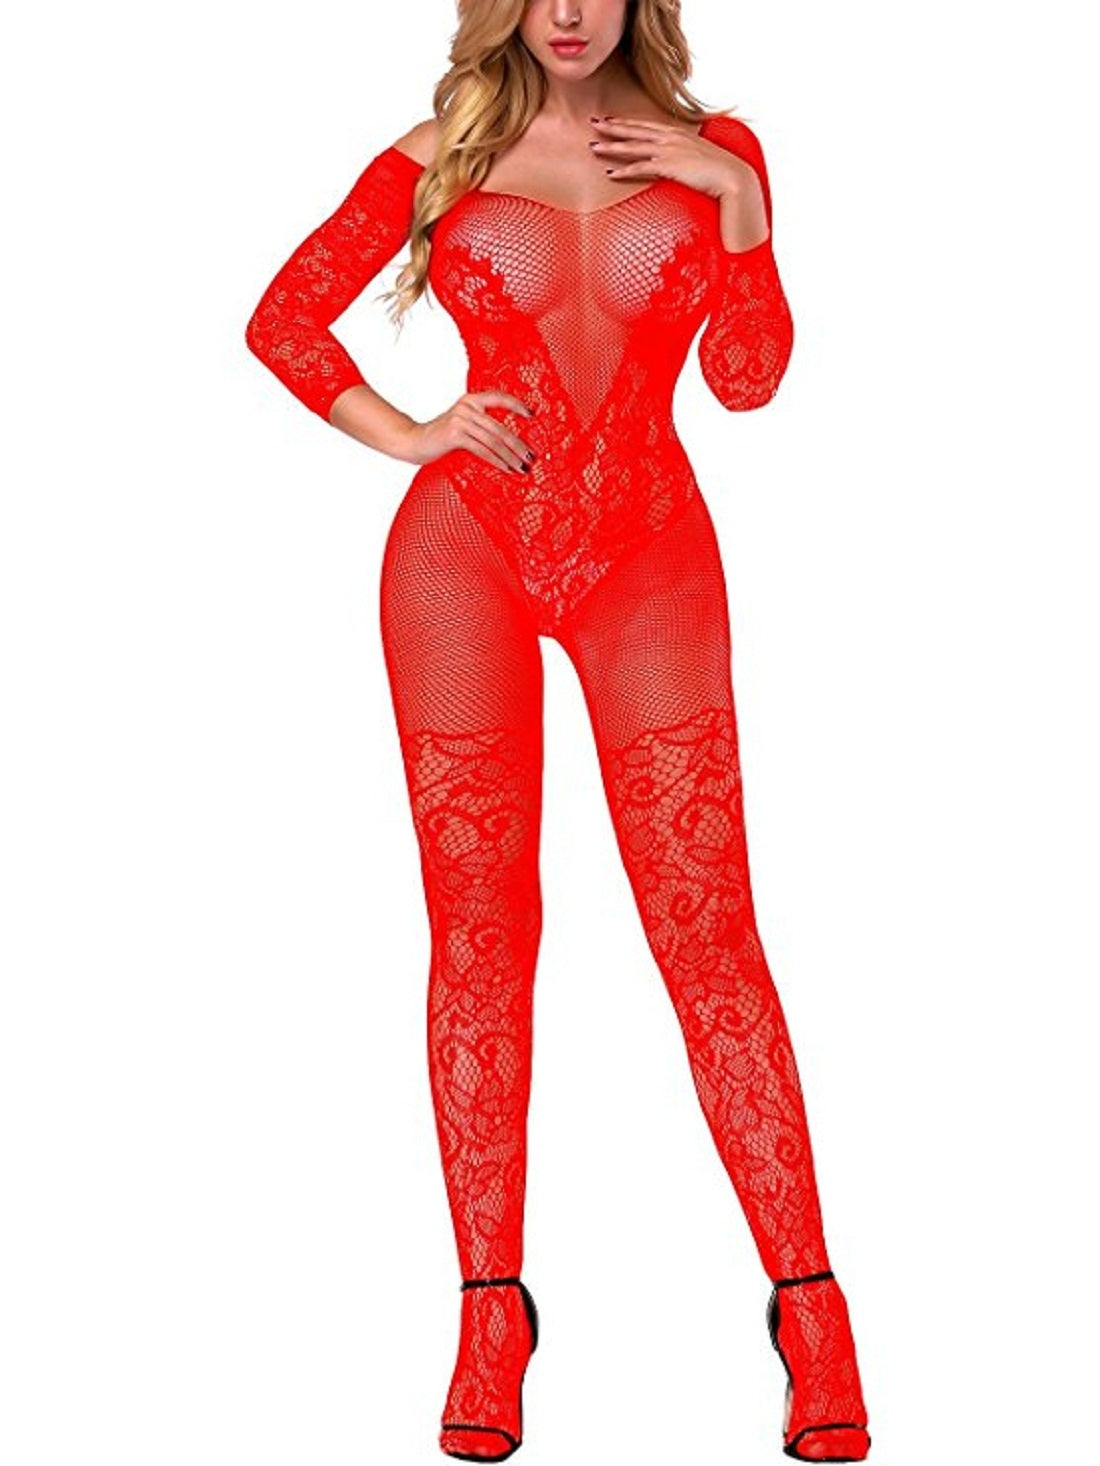 Kaamastra Fishnet Open Crotch Long Sleeve Bodystocking & Free Thong Red